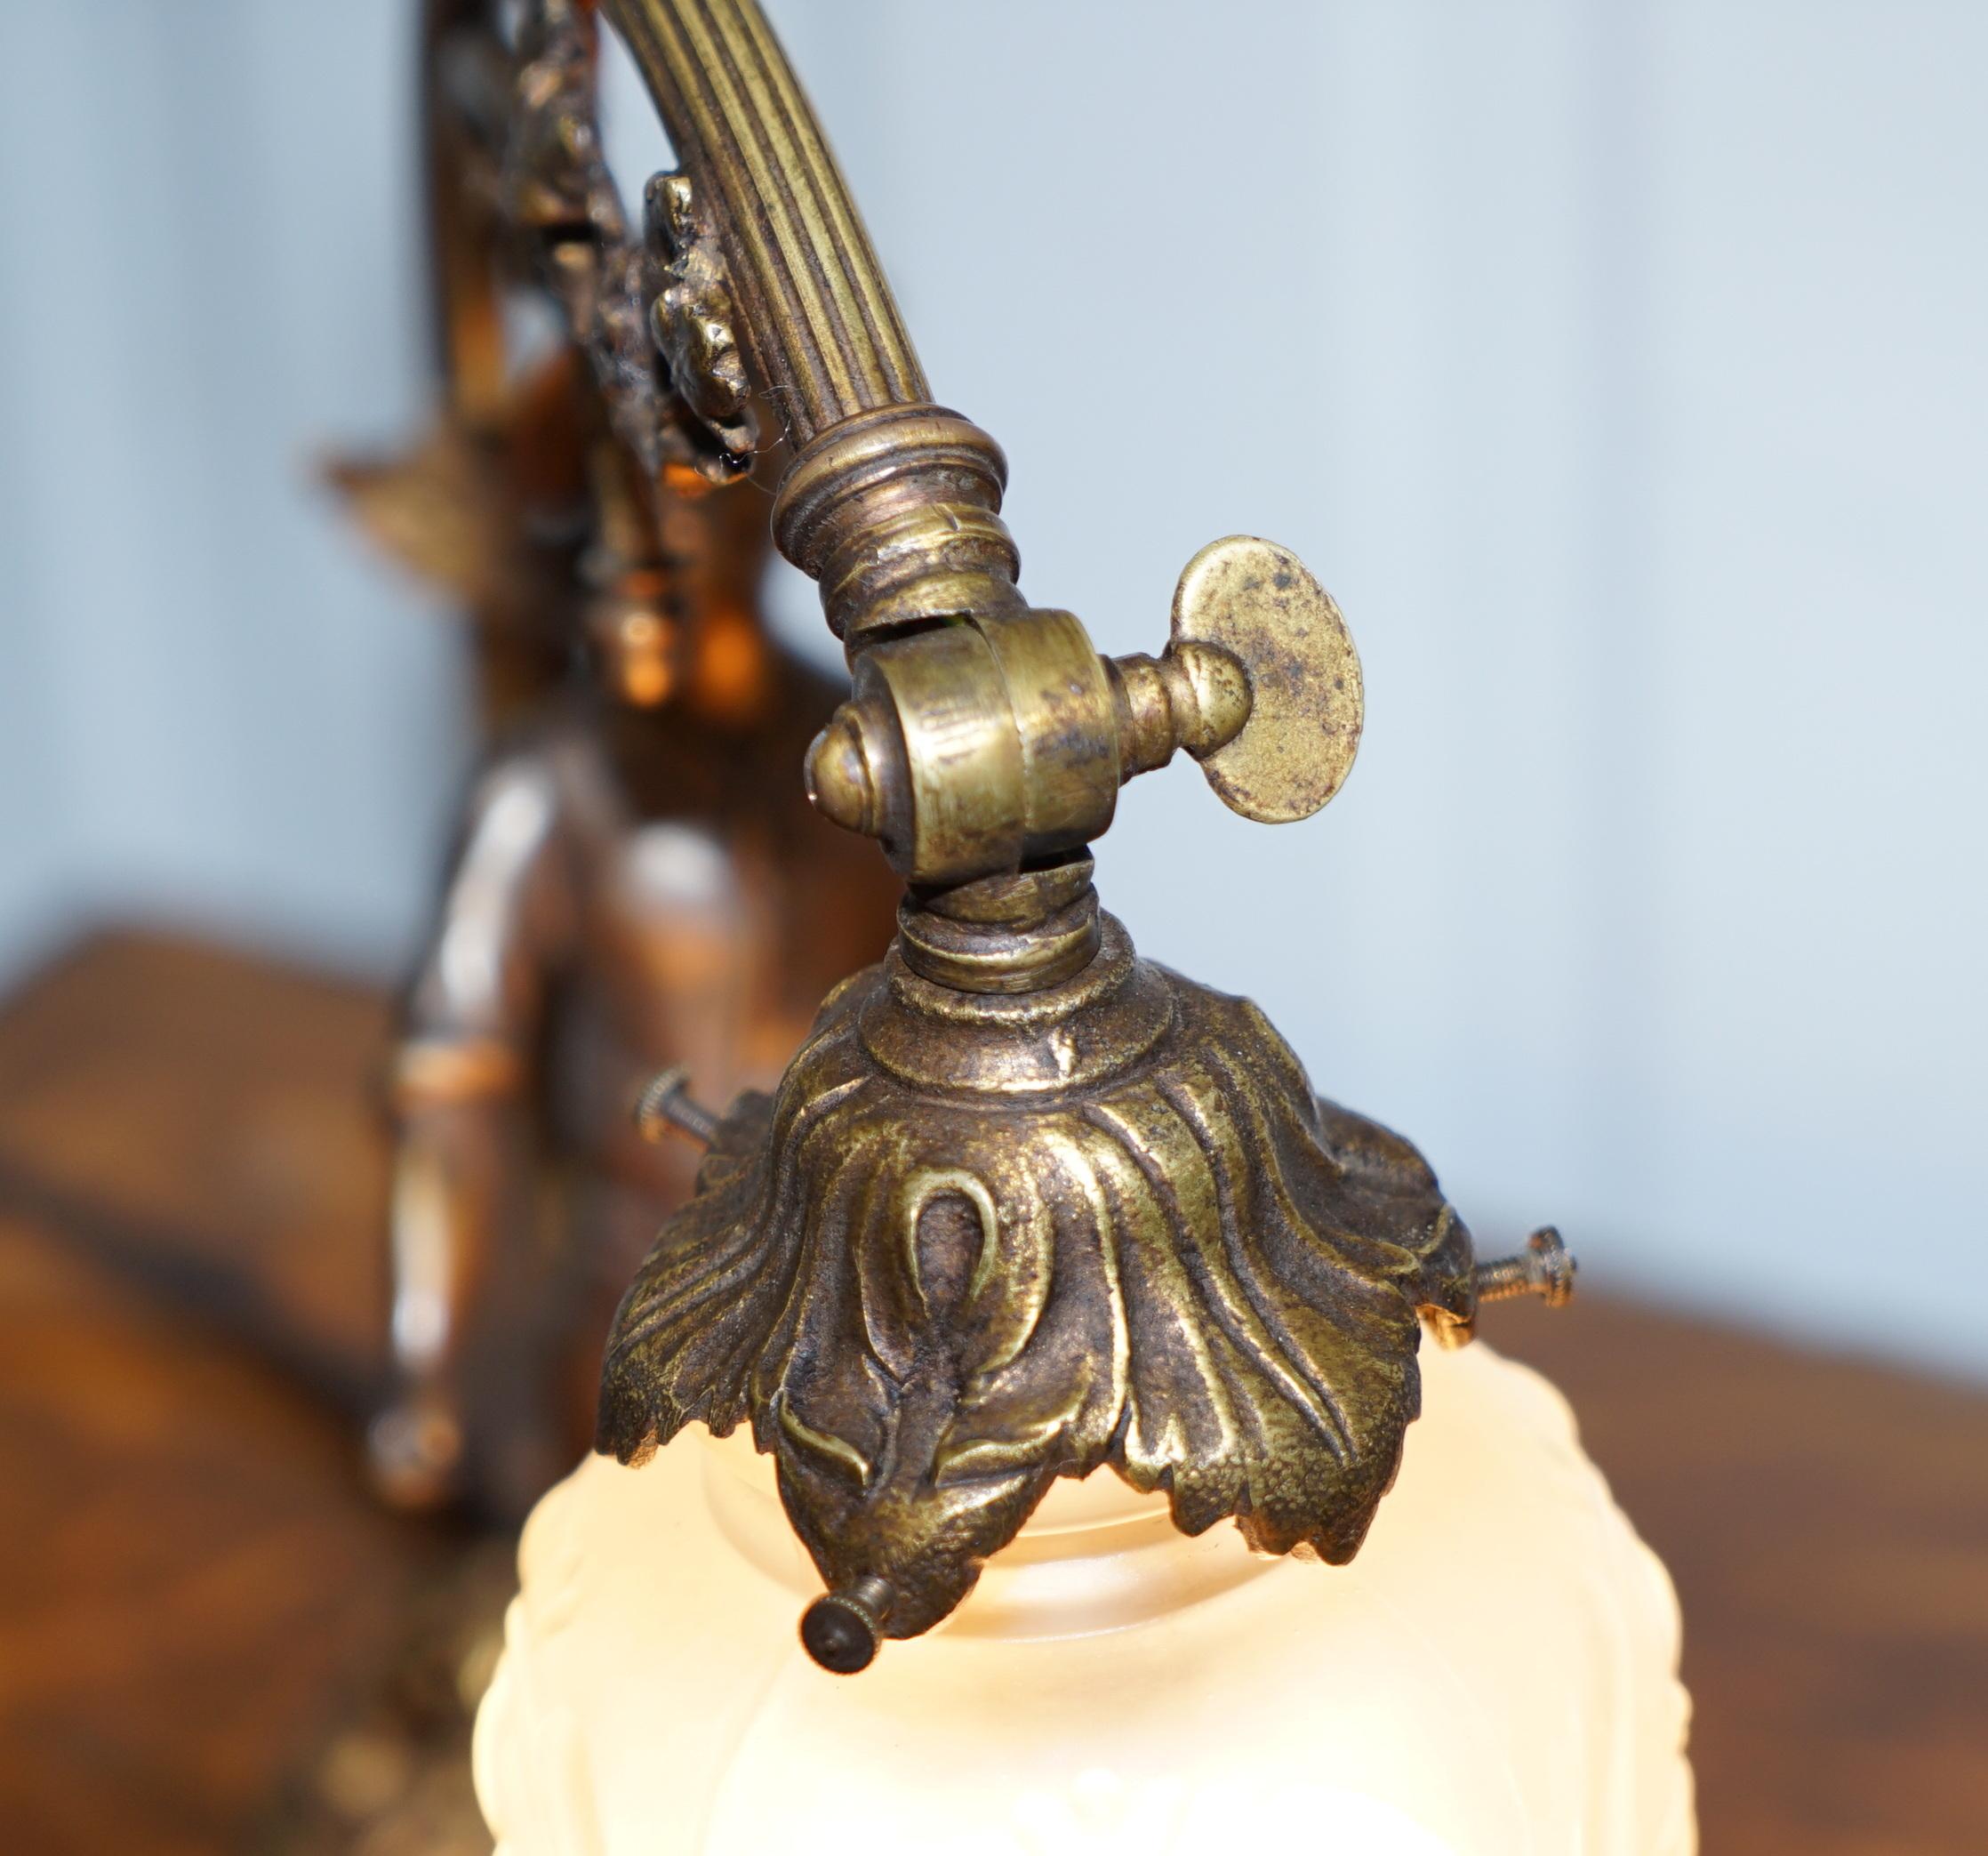 Stunning Solid Bronze circa 1920 Table Lamp with Statue Original Shade Rare Find 1